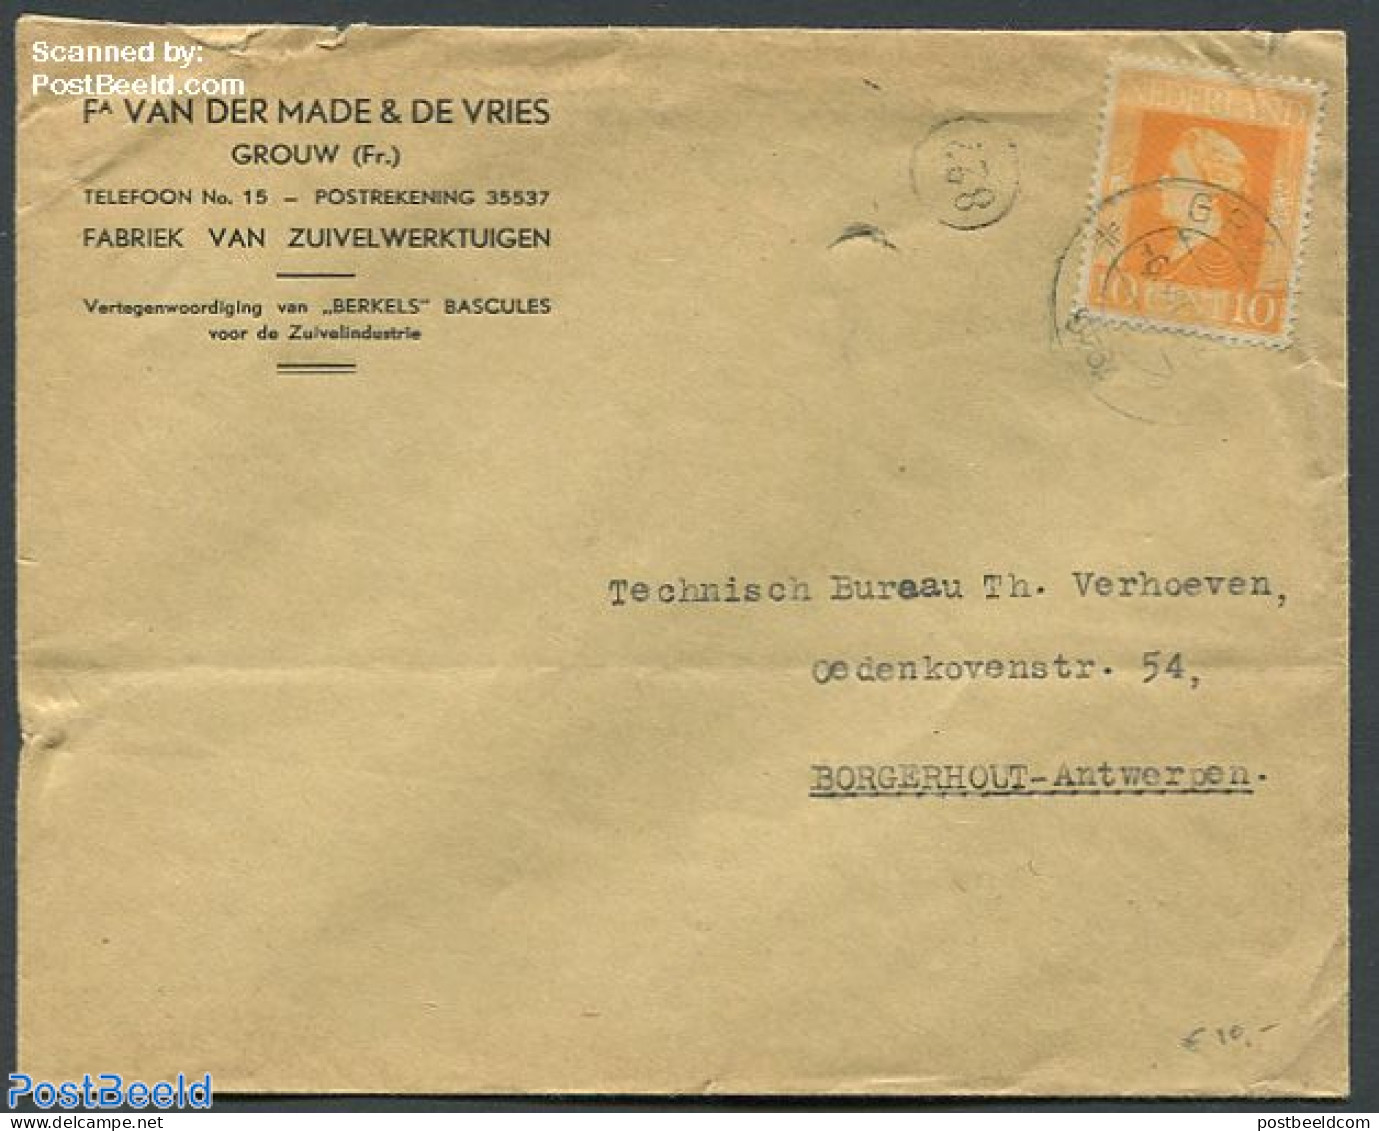 Netherlands 1944 Cover To Antwerpen With Nvhp No. 433, Postal History, History - Kings & Queens (Royalty) - Covers & Documents